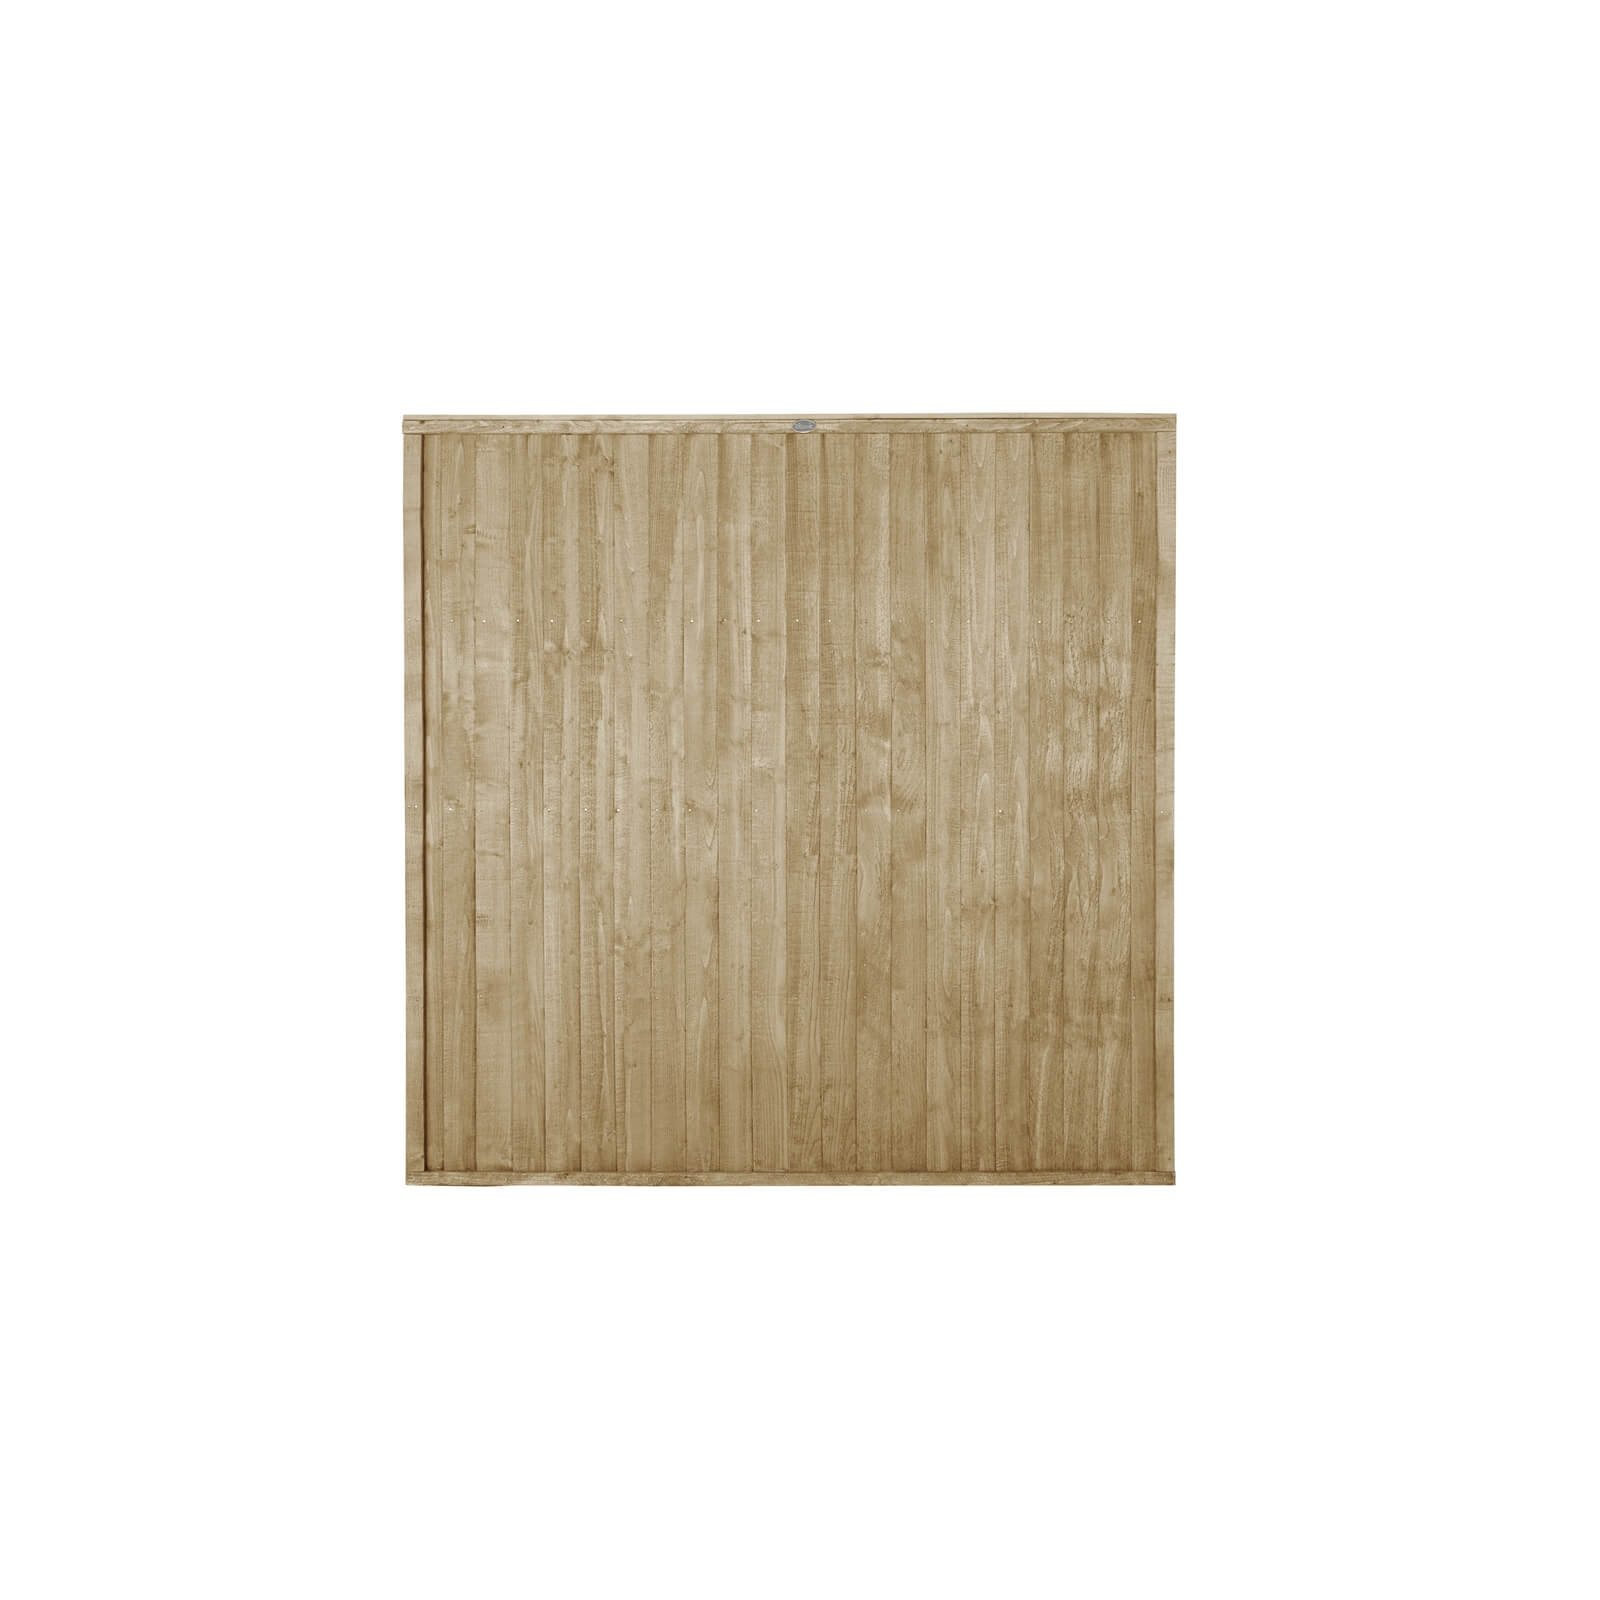 6ft x 6ft (1.83m x 1.83m) Pressure Treated Closeboard Fence Panel - Pack of 20